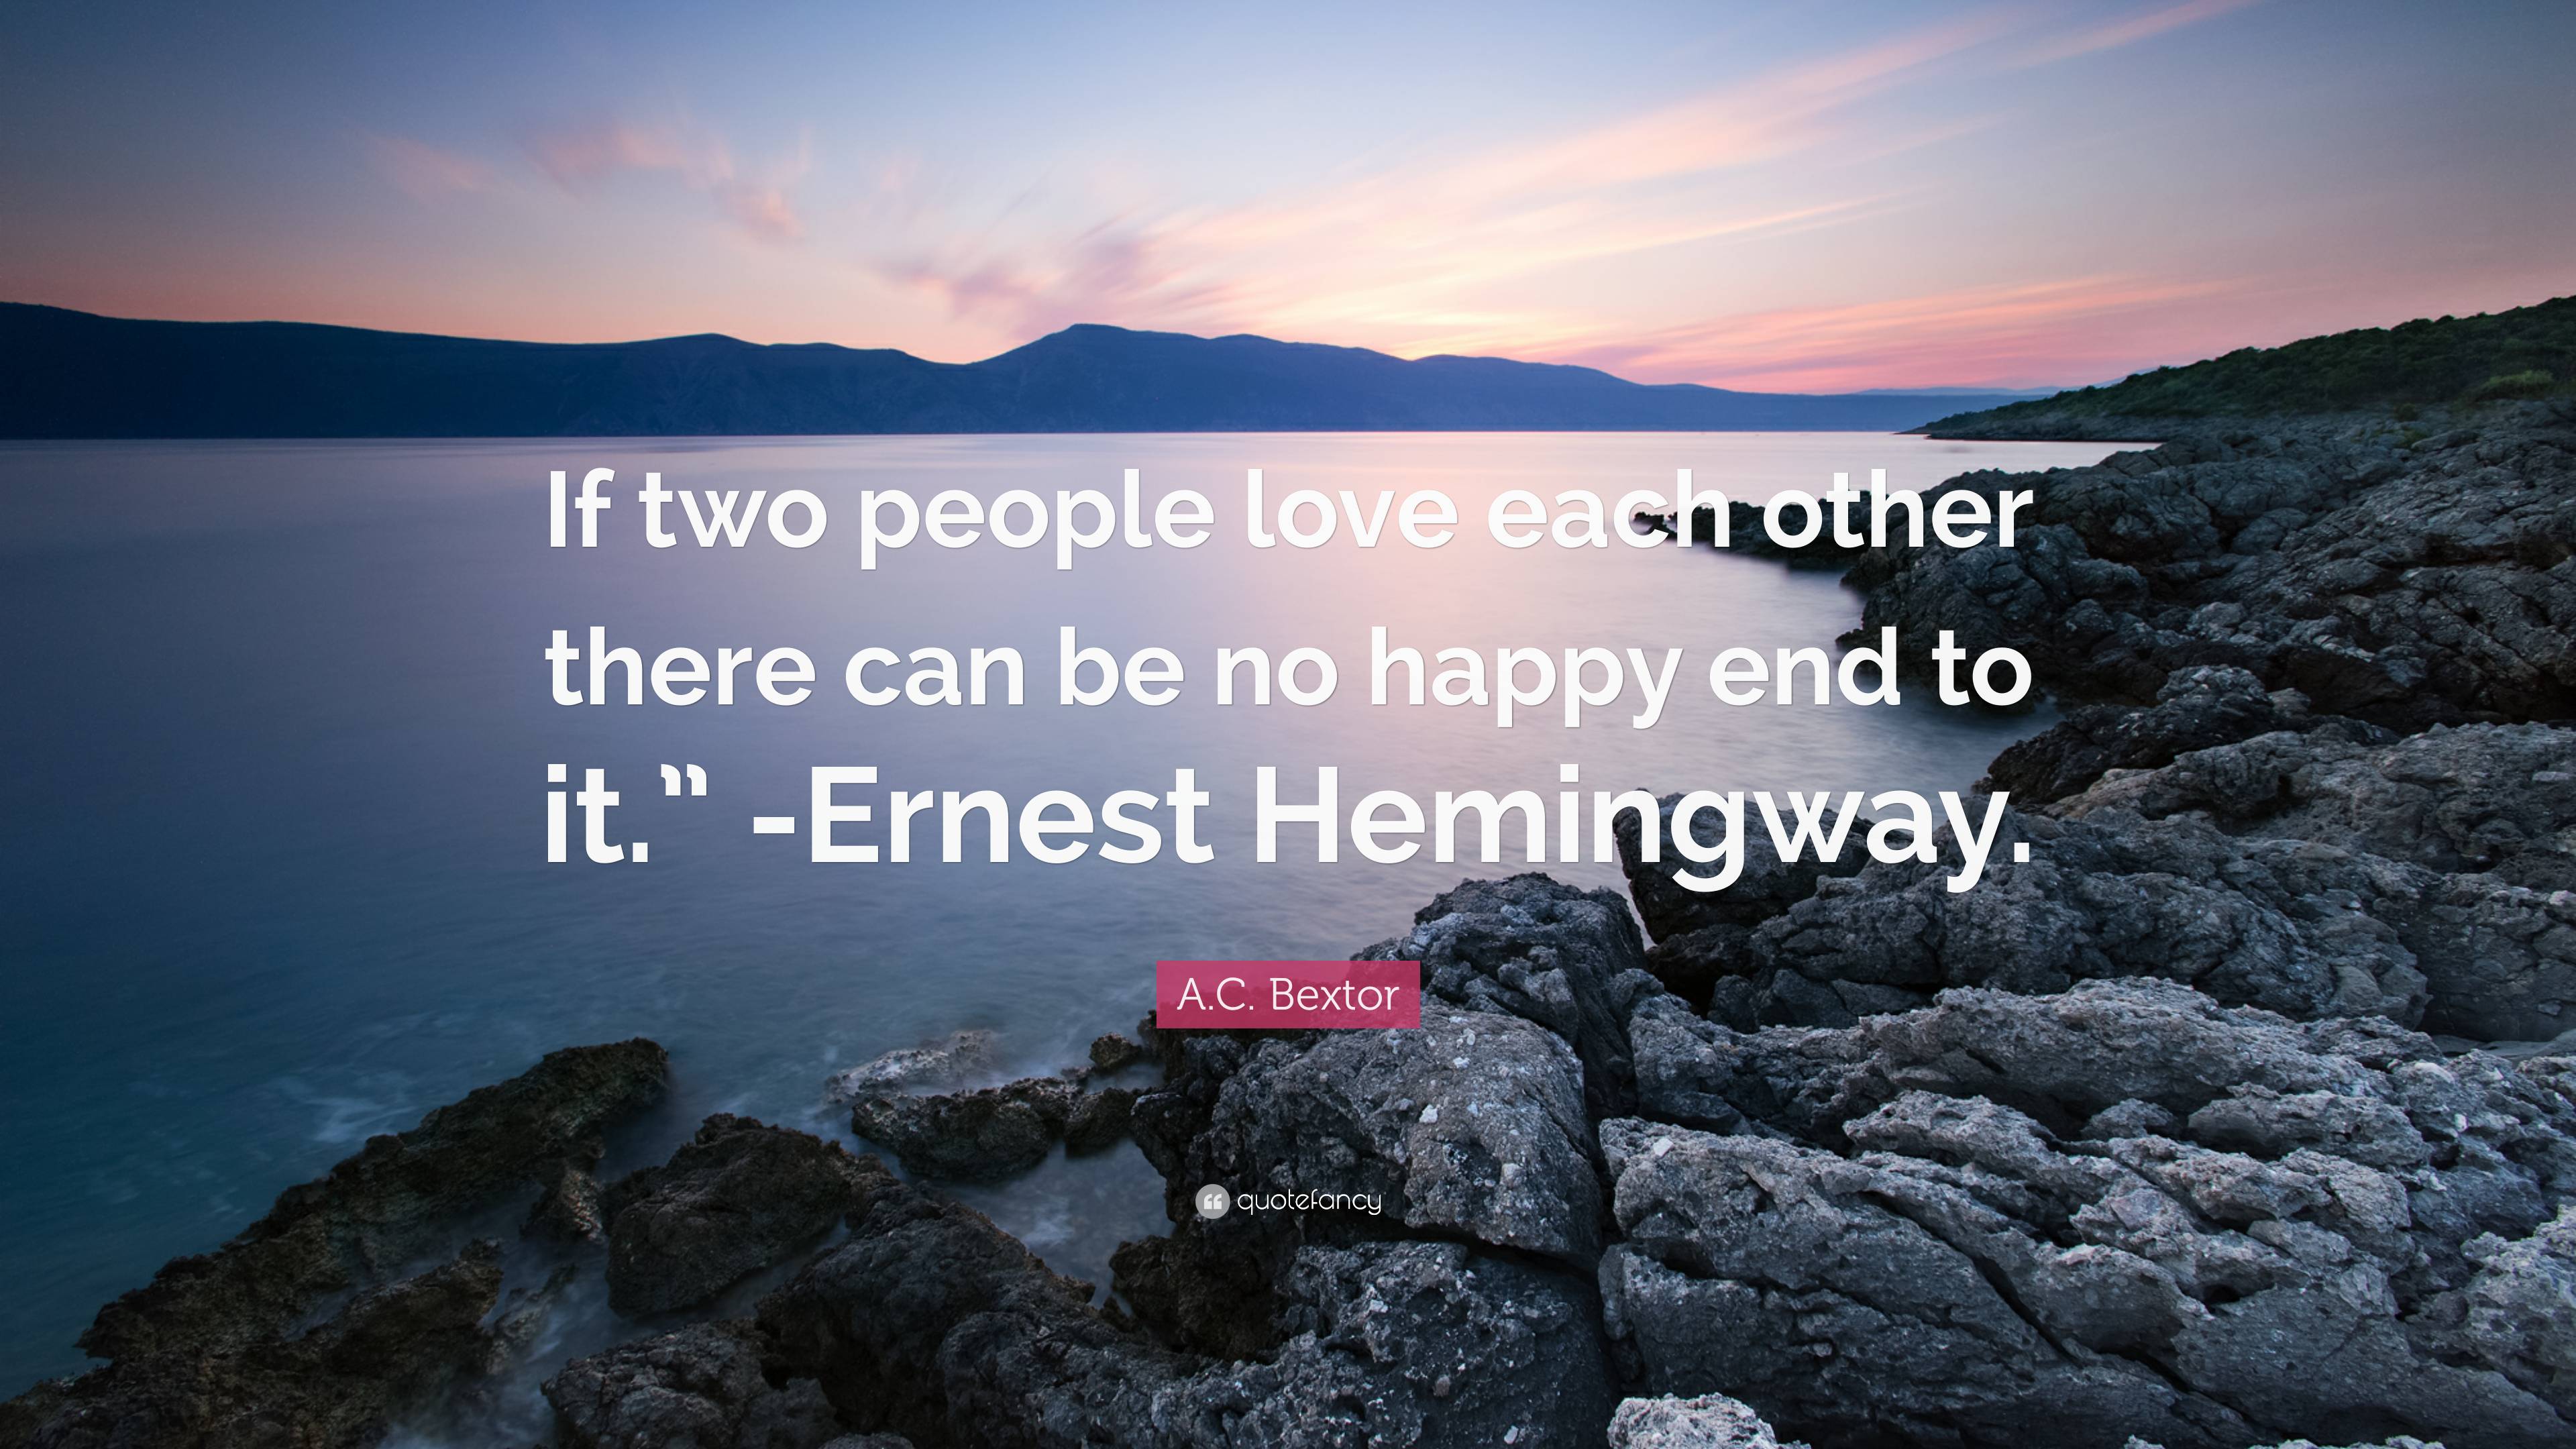 A.C. Bextor Quote: “If two people love each other there can be no happy ...